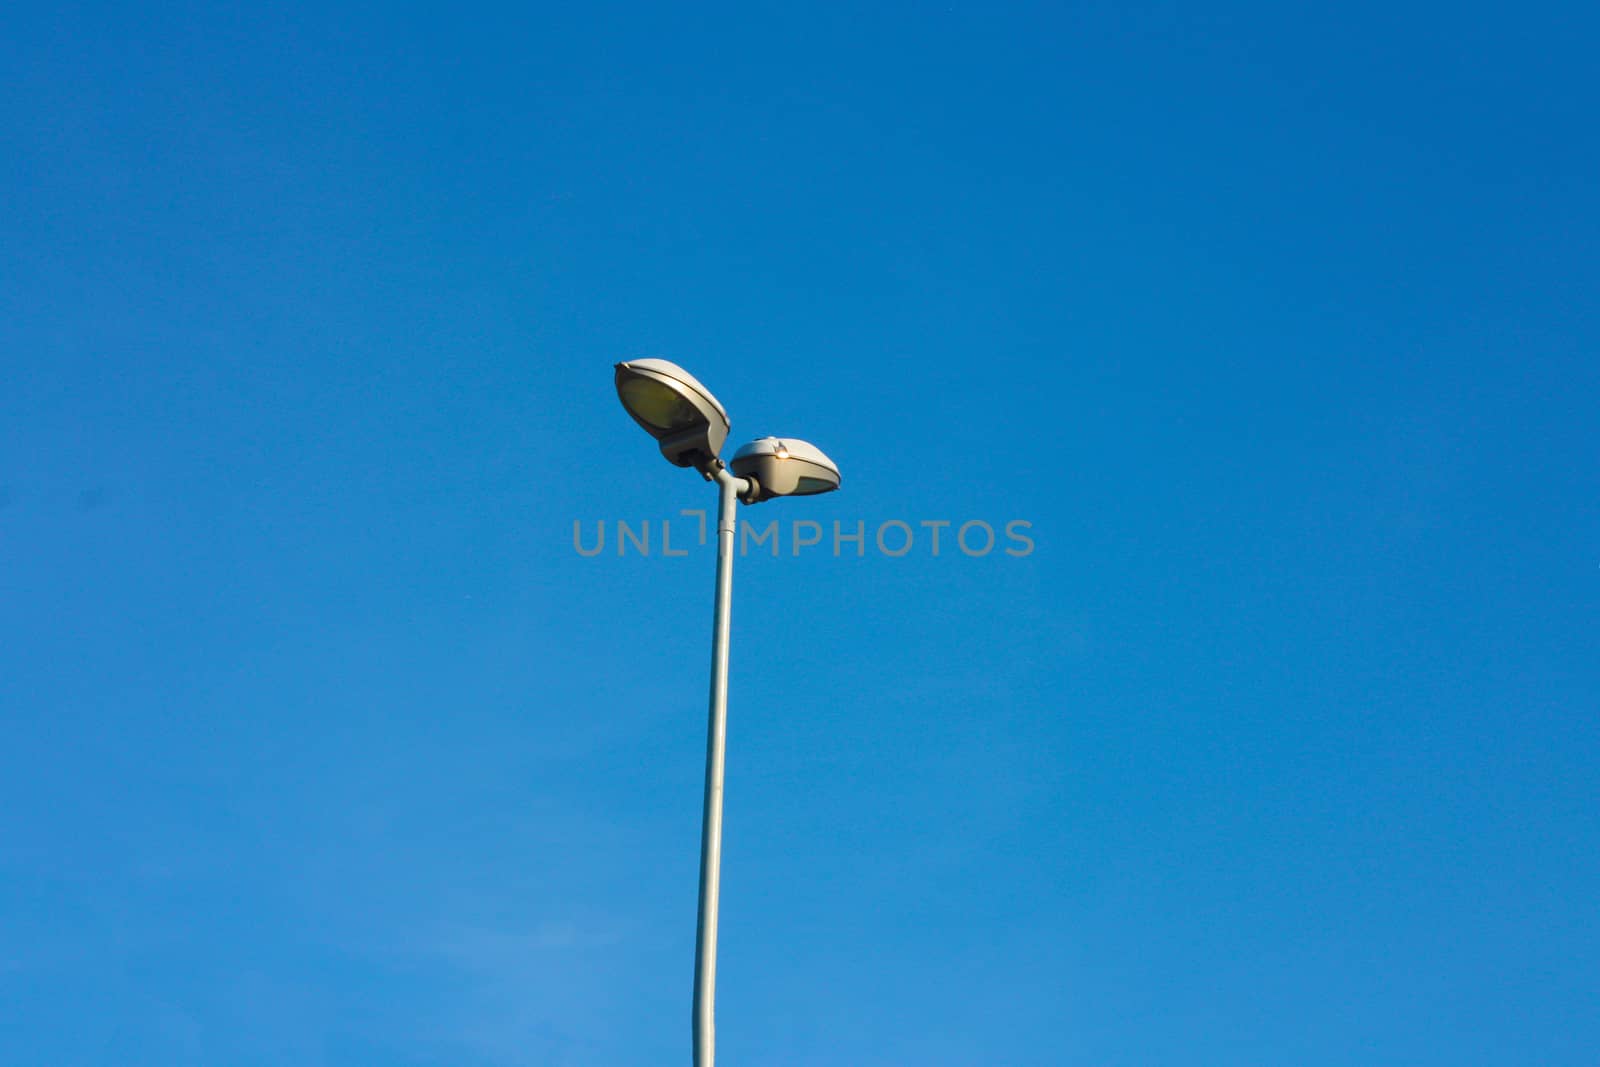 slim and lonely lamppost in contrast against the clear blue sky by alessiapenny90